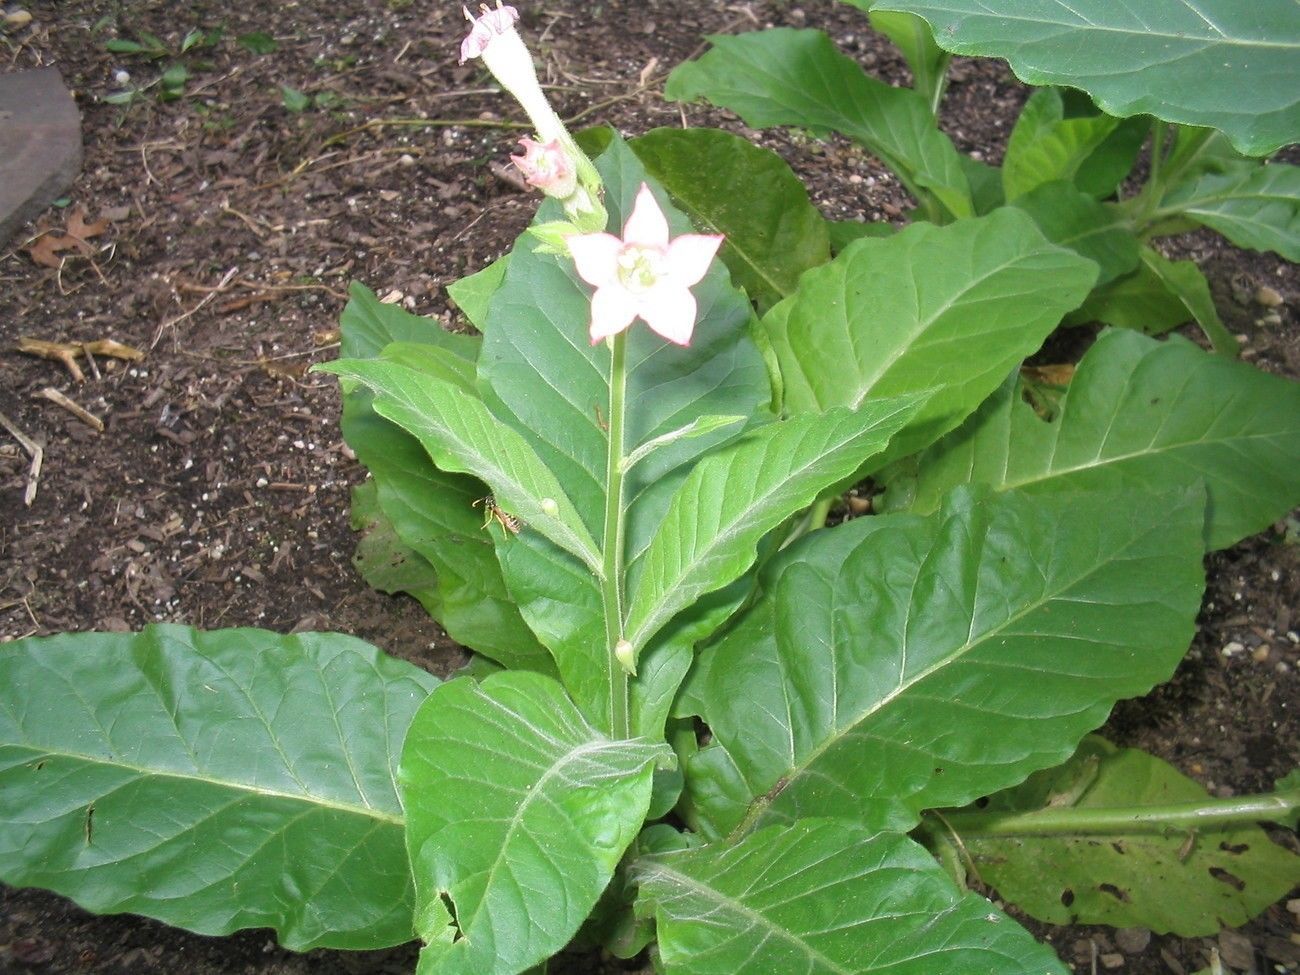 Details about   1000 Perique Tobacco Seeds ~ Heirloom Nicotiana Tabacum ~ Distinctive Flavor!